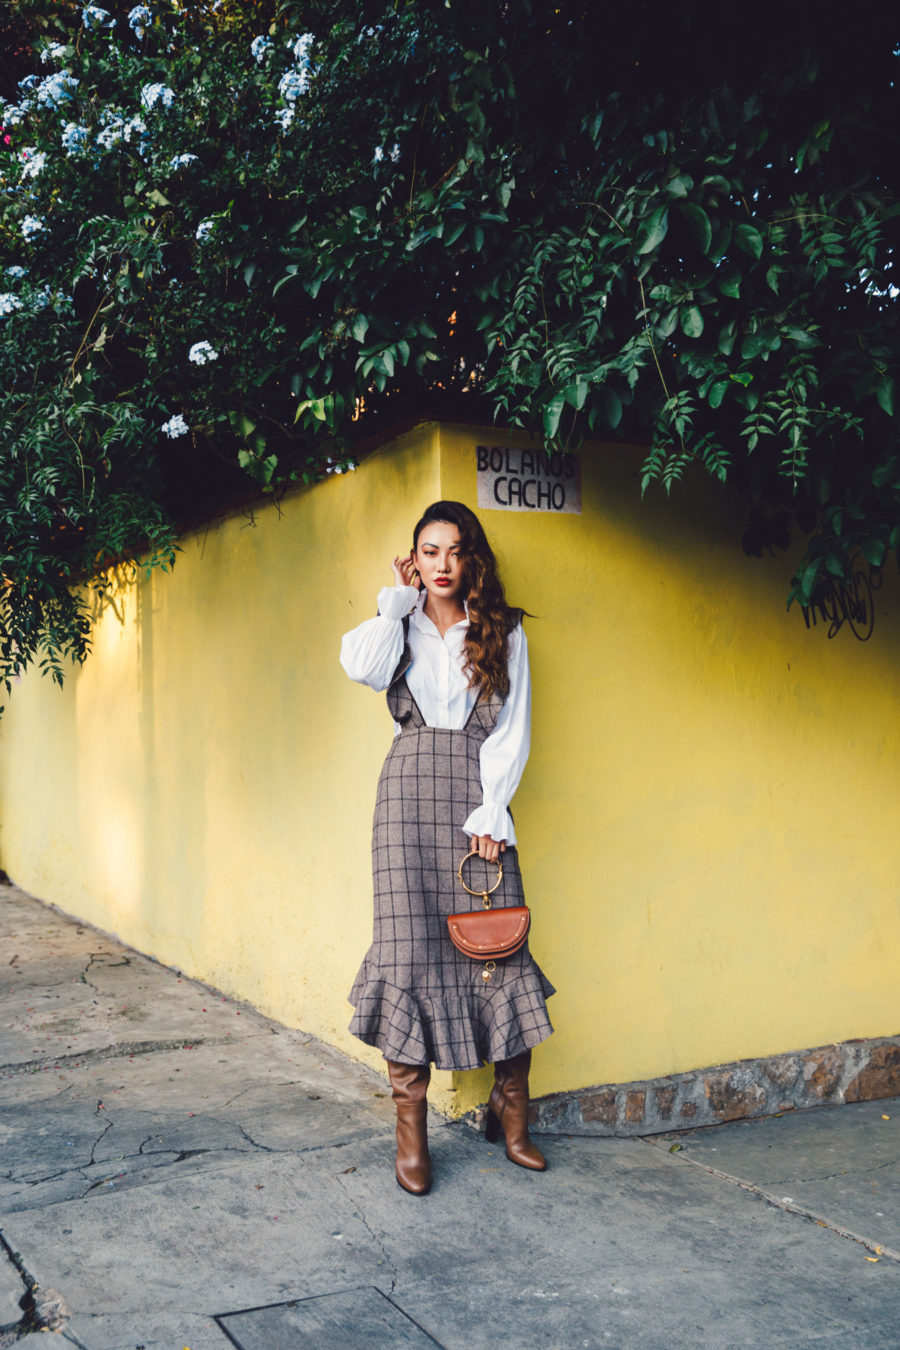 How to build the perfect fall wardrobe on a budget, Brown Ruffle Plaid Dress with Ruffle Blouse // Notjessfashion.com